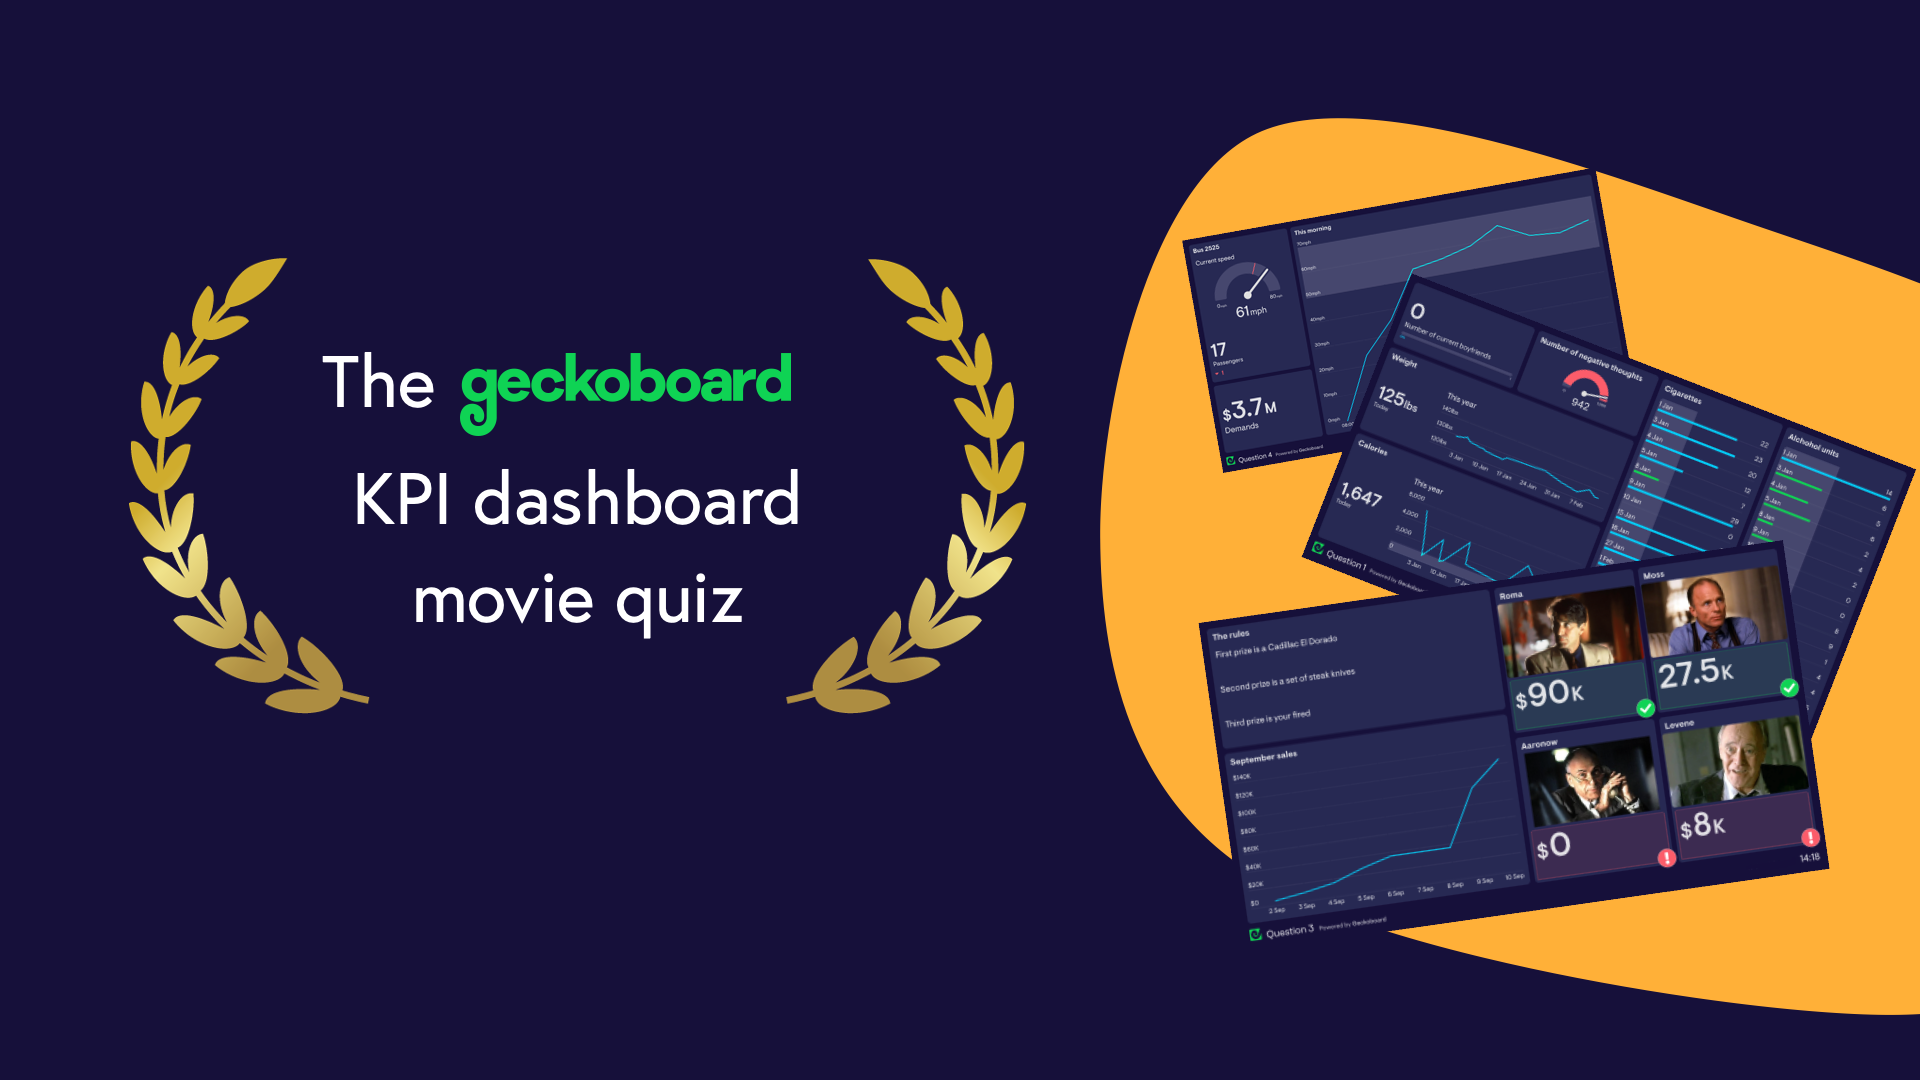 It's a movie quiz, except the questions are all KPI dashboards